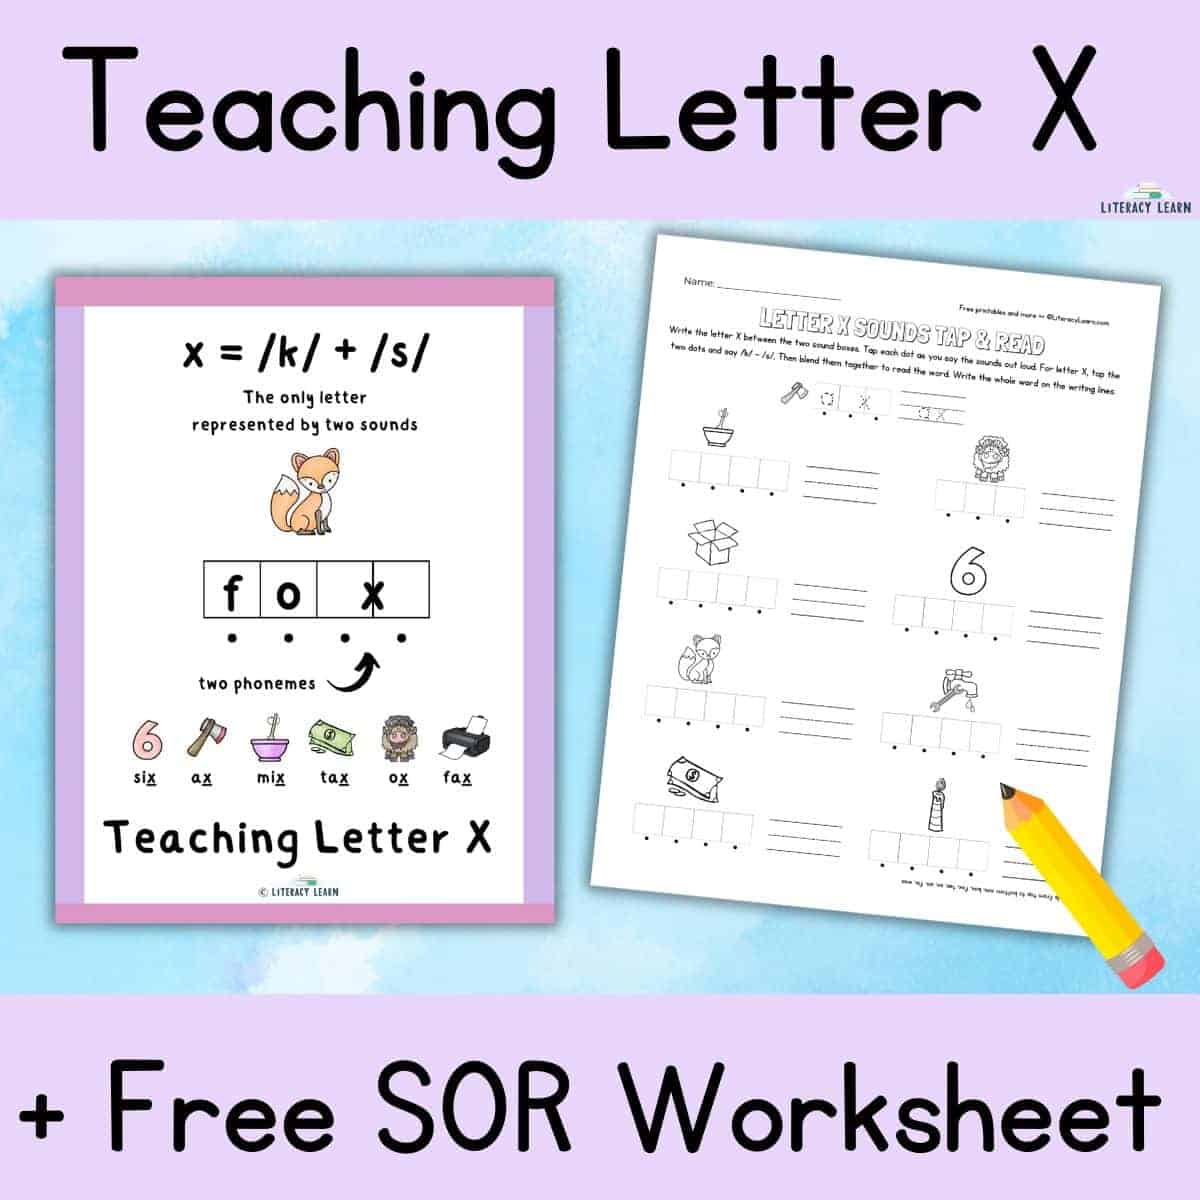 Colorful graphic entitled "Teaching Letter X" with images of worksheets and a pencil.